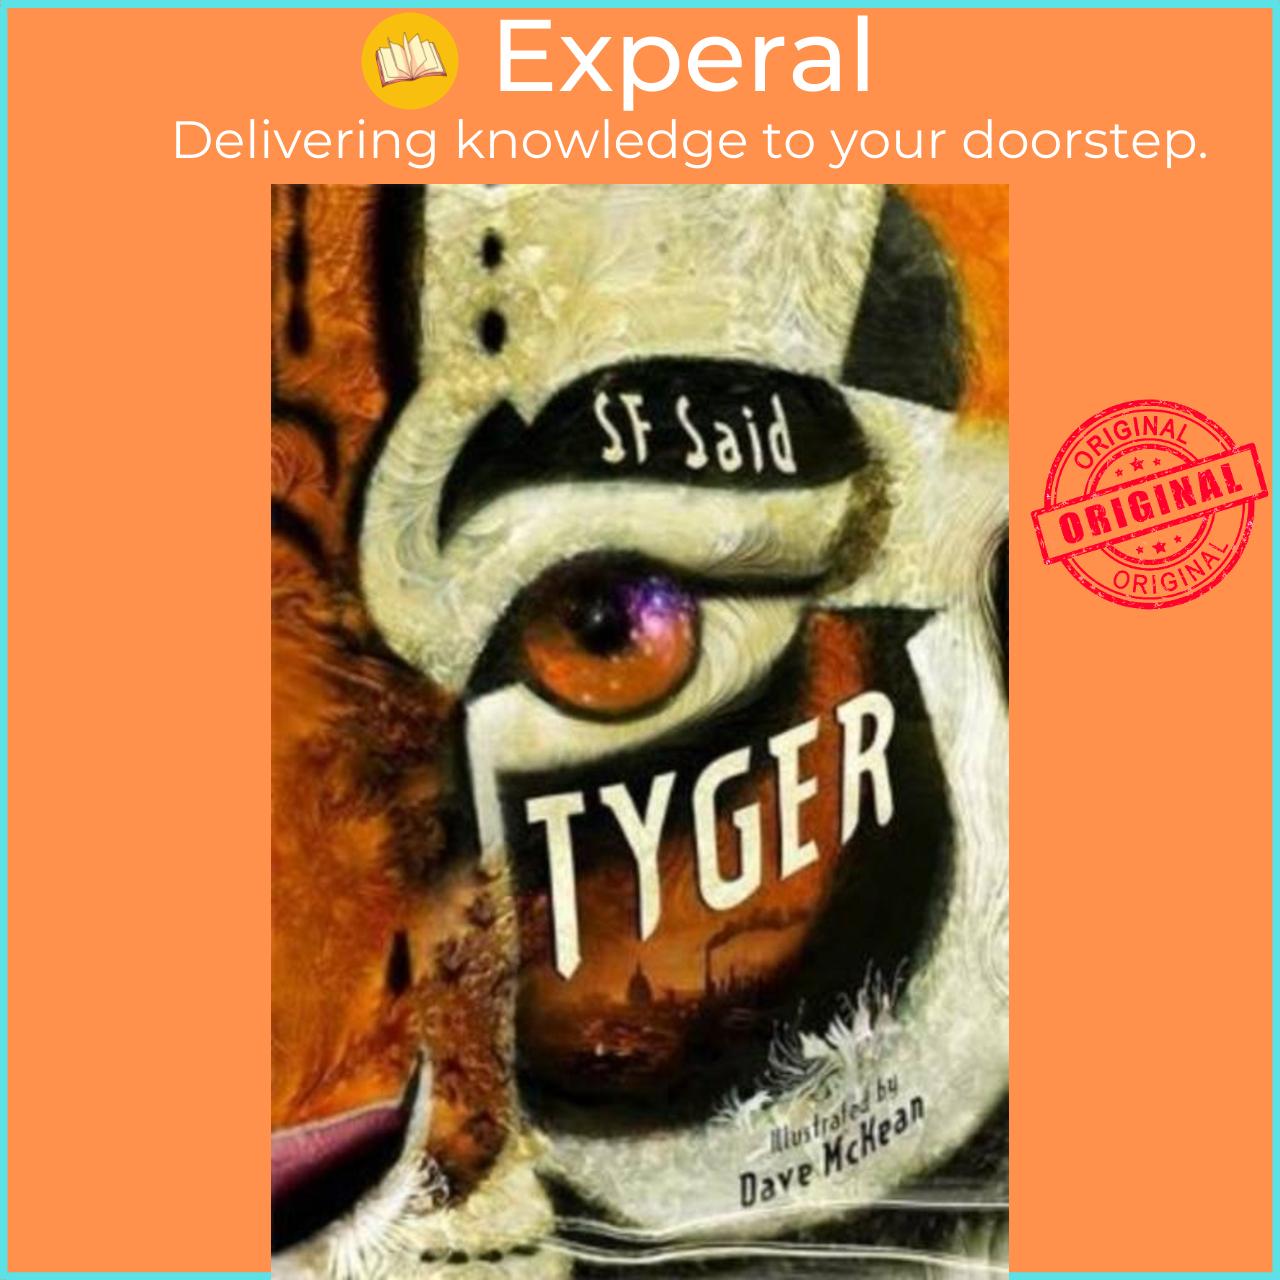 Sách - Tyger by Dave McKean (UK edition, hardcover)